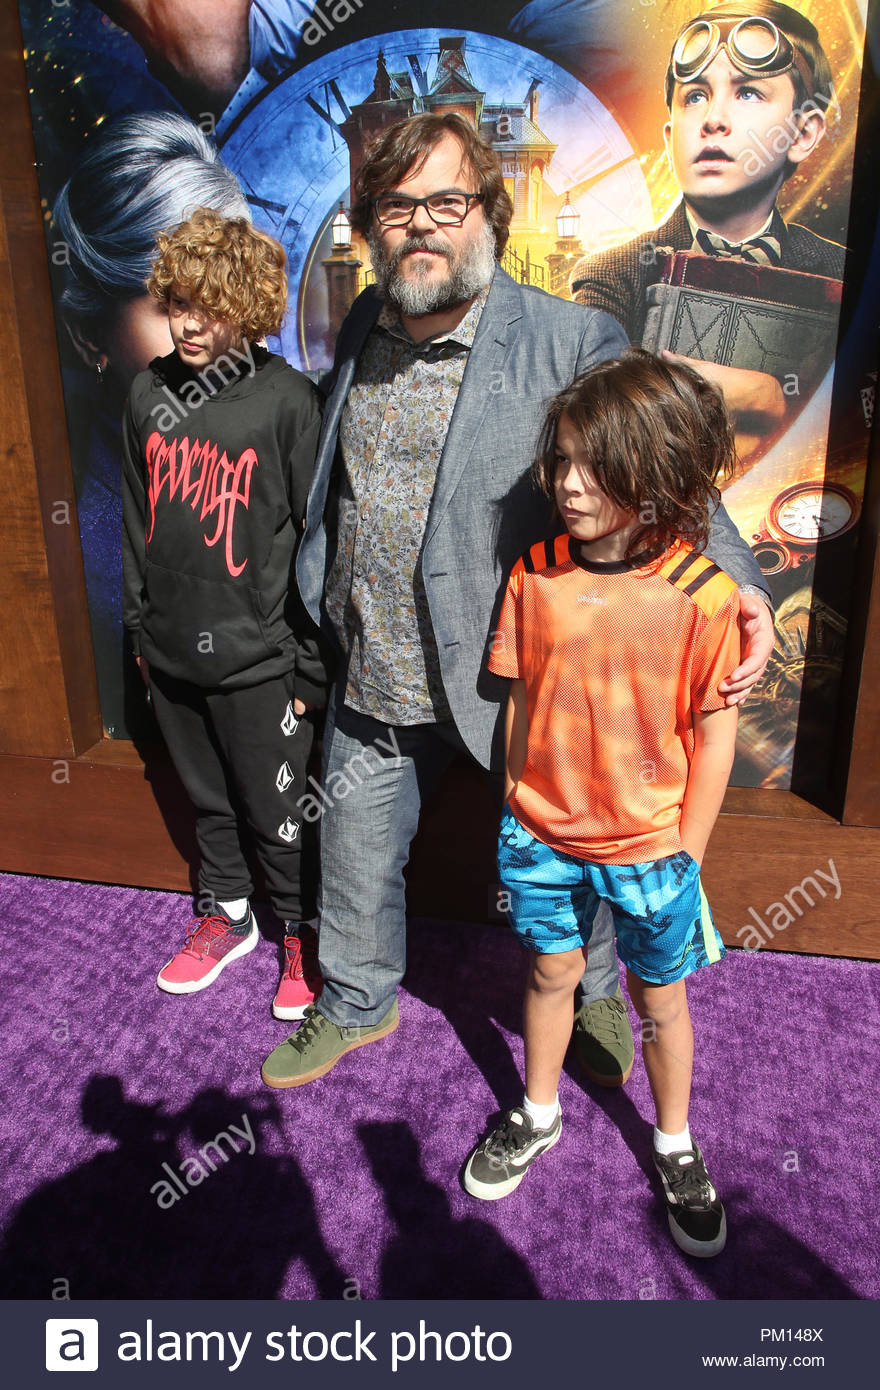 Thomas with his elder brother and father in a movie premier.